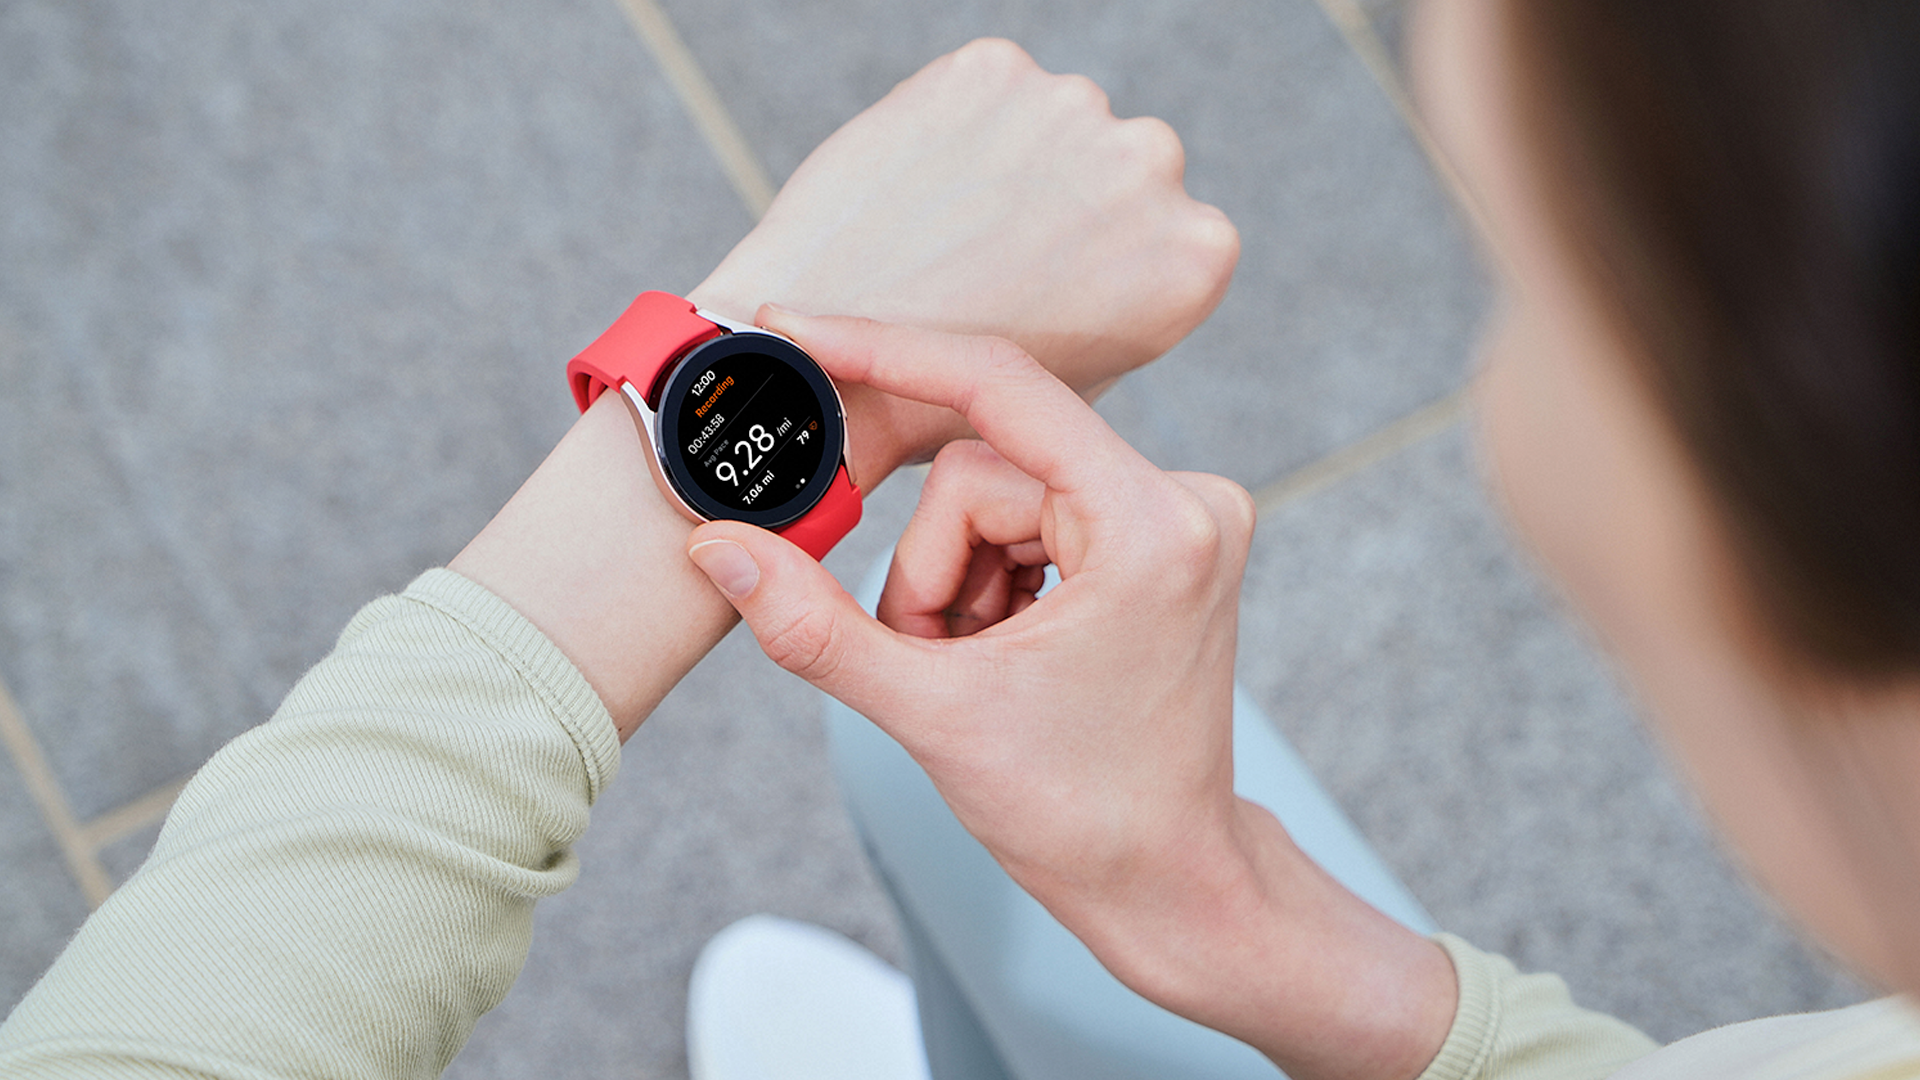 The Samsung Galaxy Watch 4 with a red wriststrap.